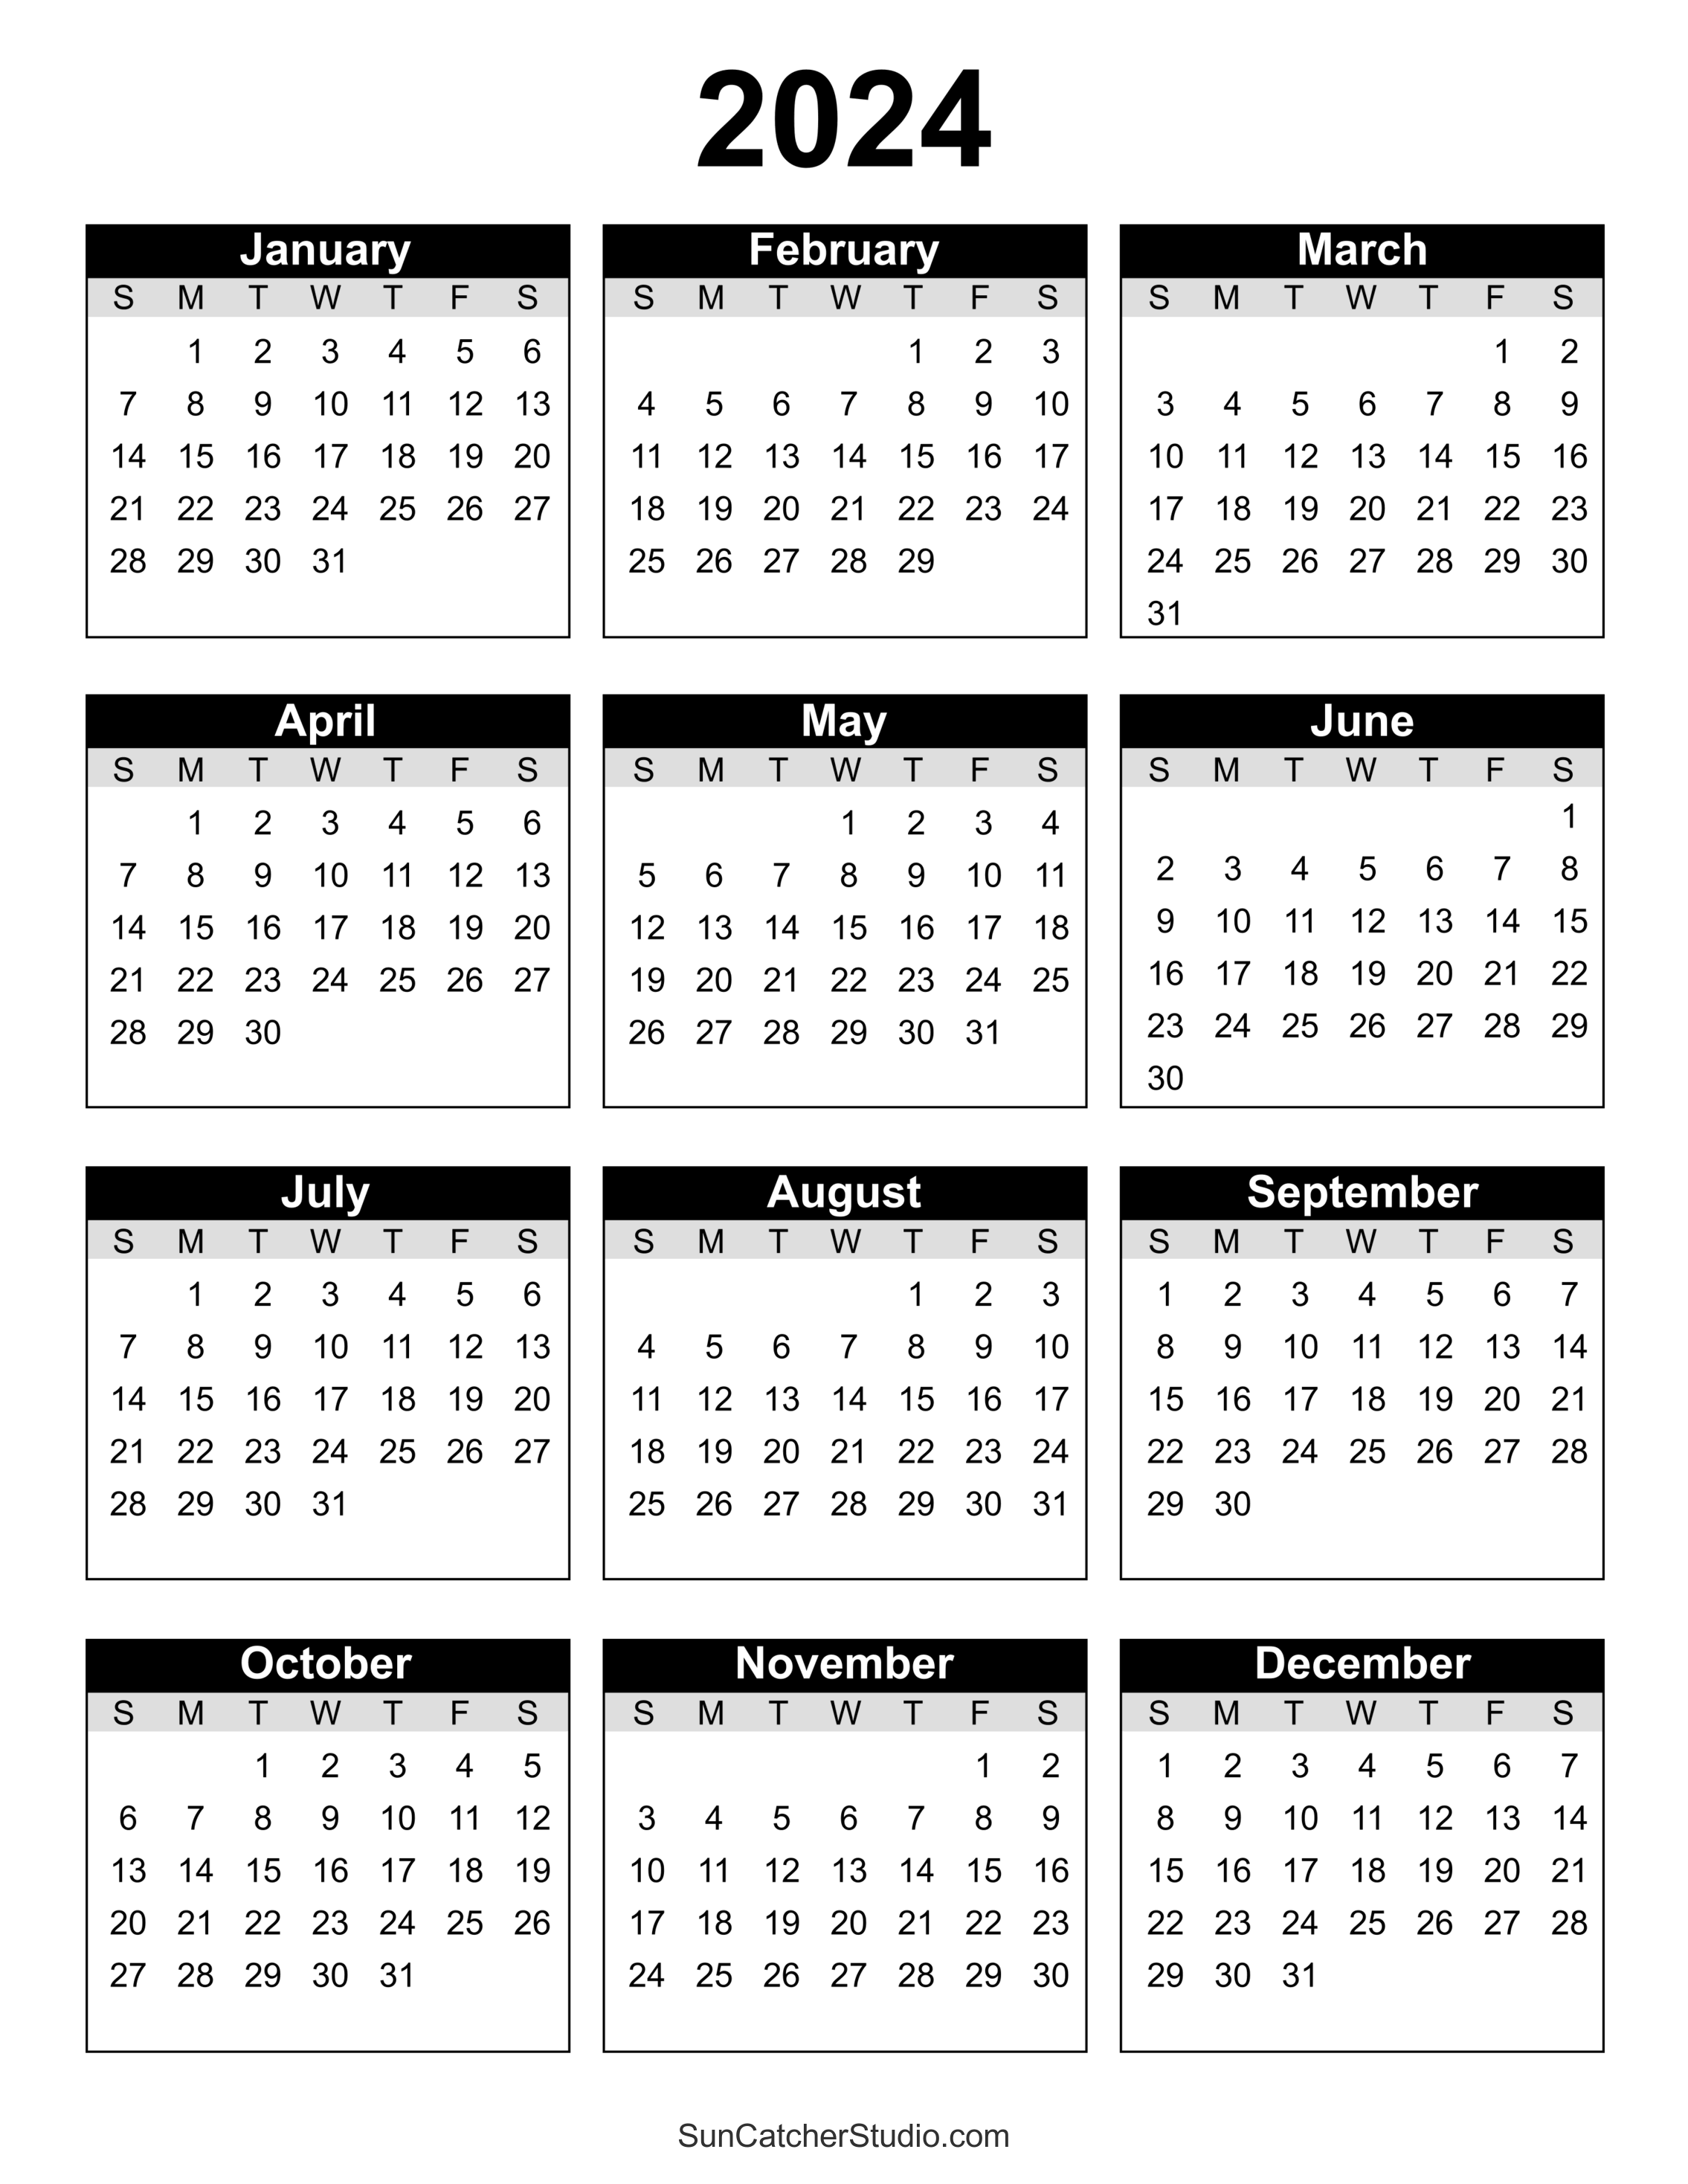 Free Printable 2024 Yearly Calendar – Diy Projects, Patterns regarding Free Printable Calendar 2024 Year